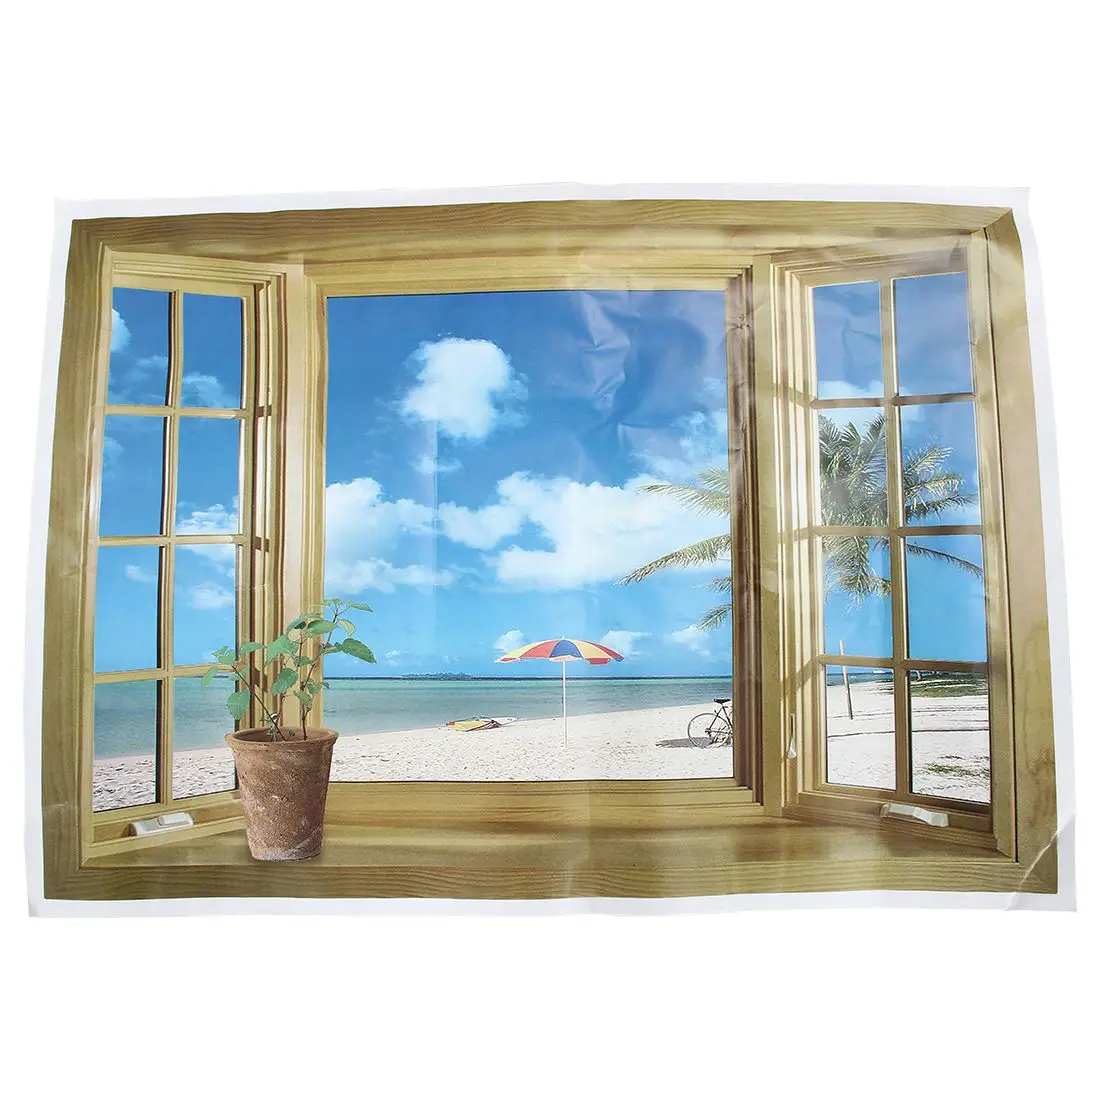 Large 3D Window Beach Sea View Wall Stickers Art Decals ...